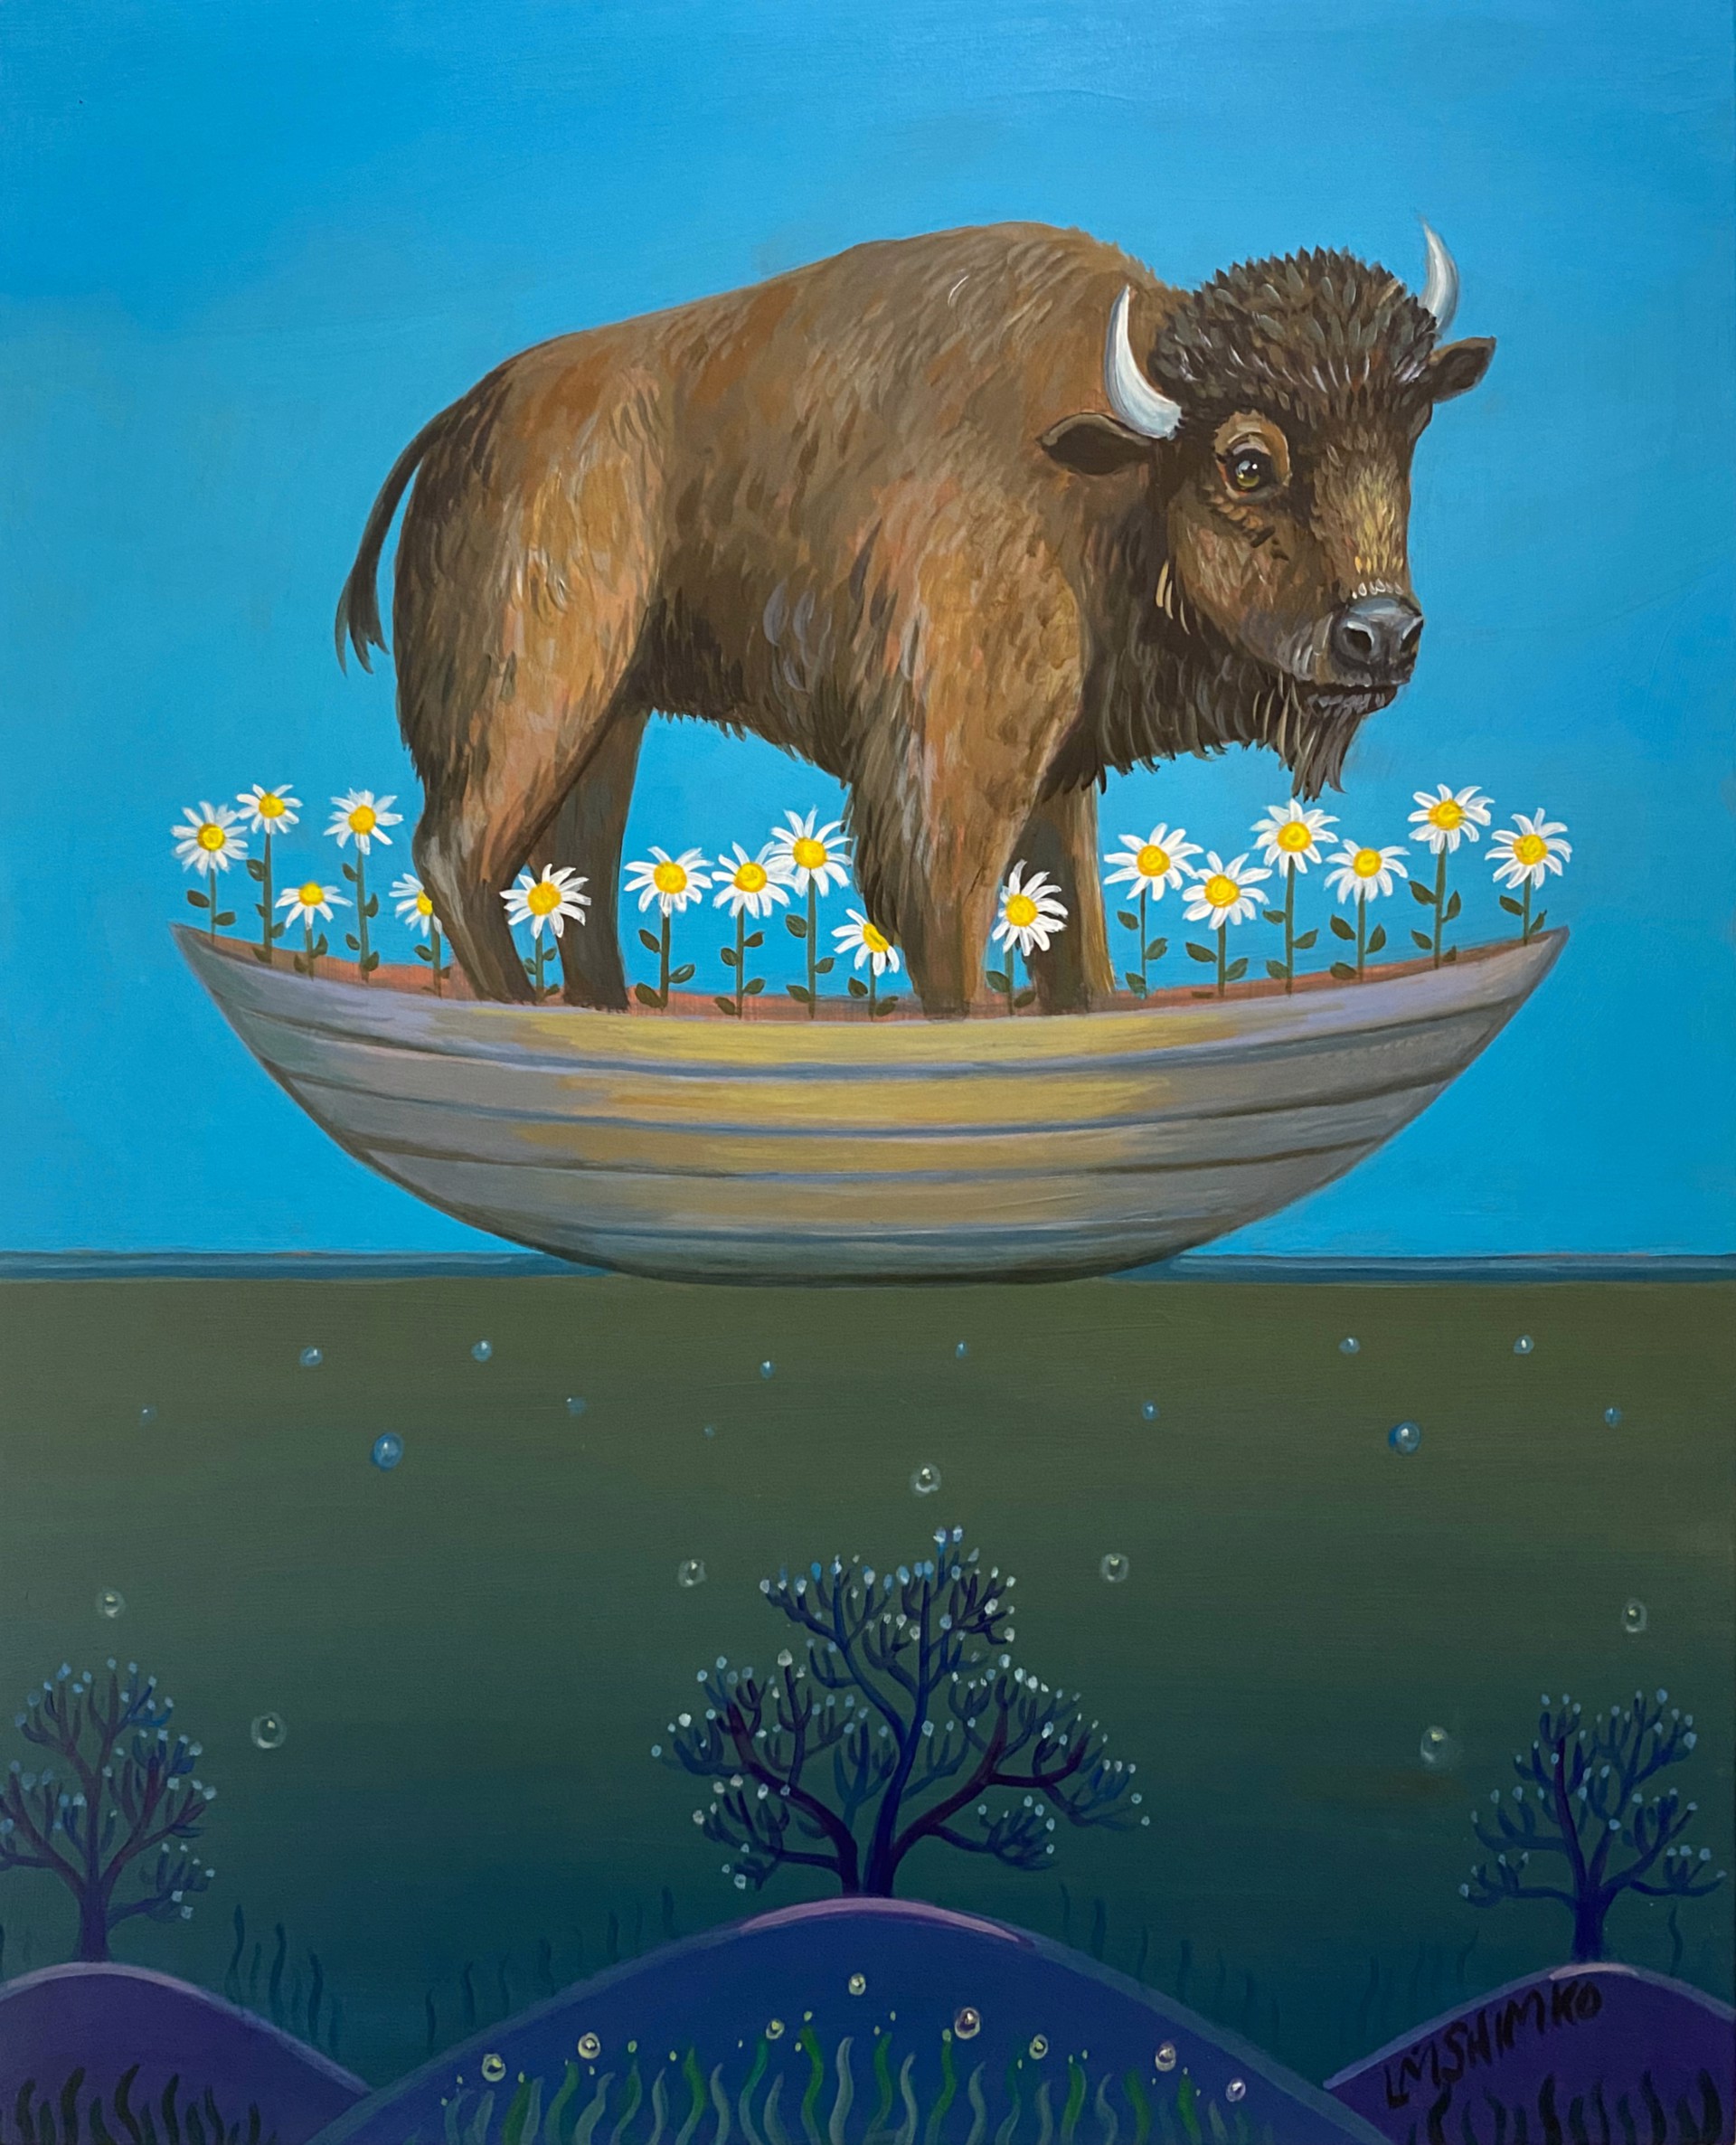 Ballast Bison Daisy by Lisa Shimko